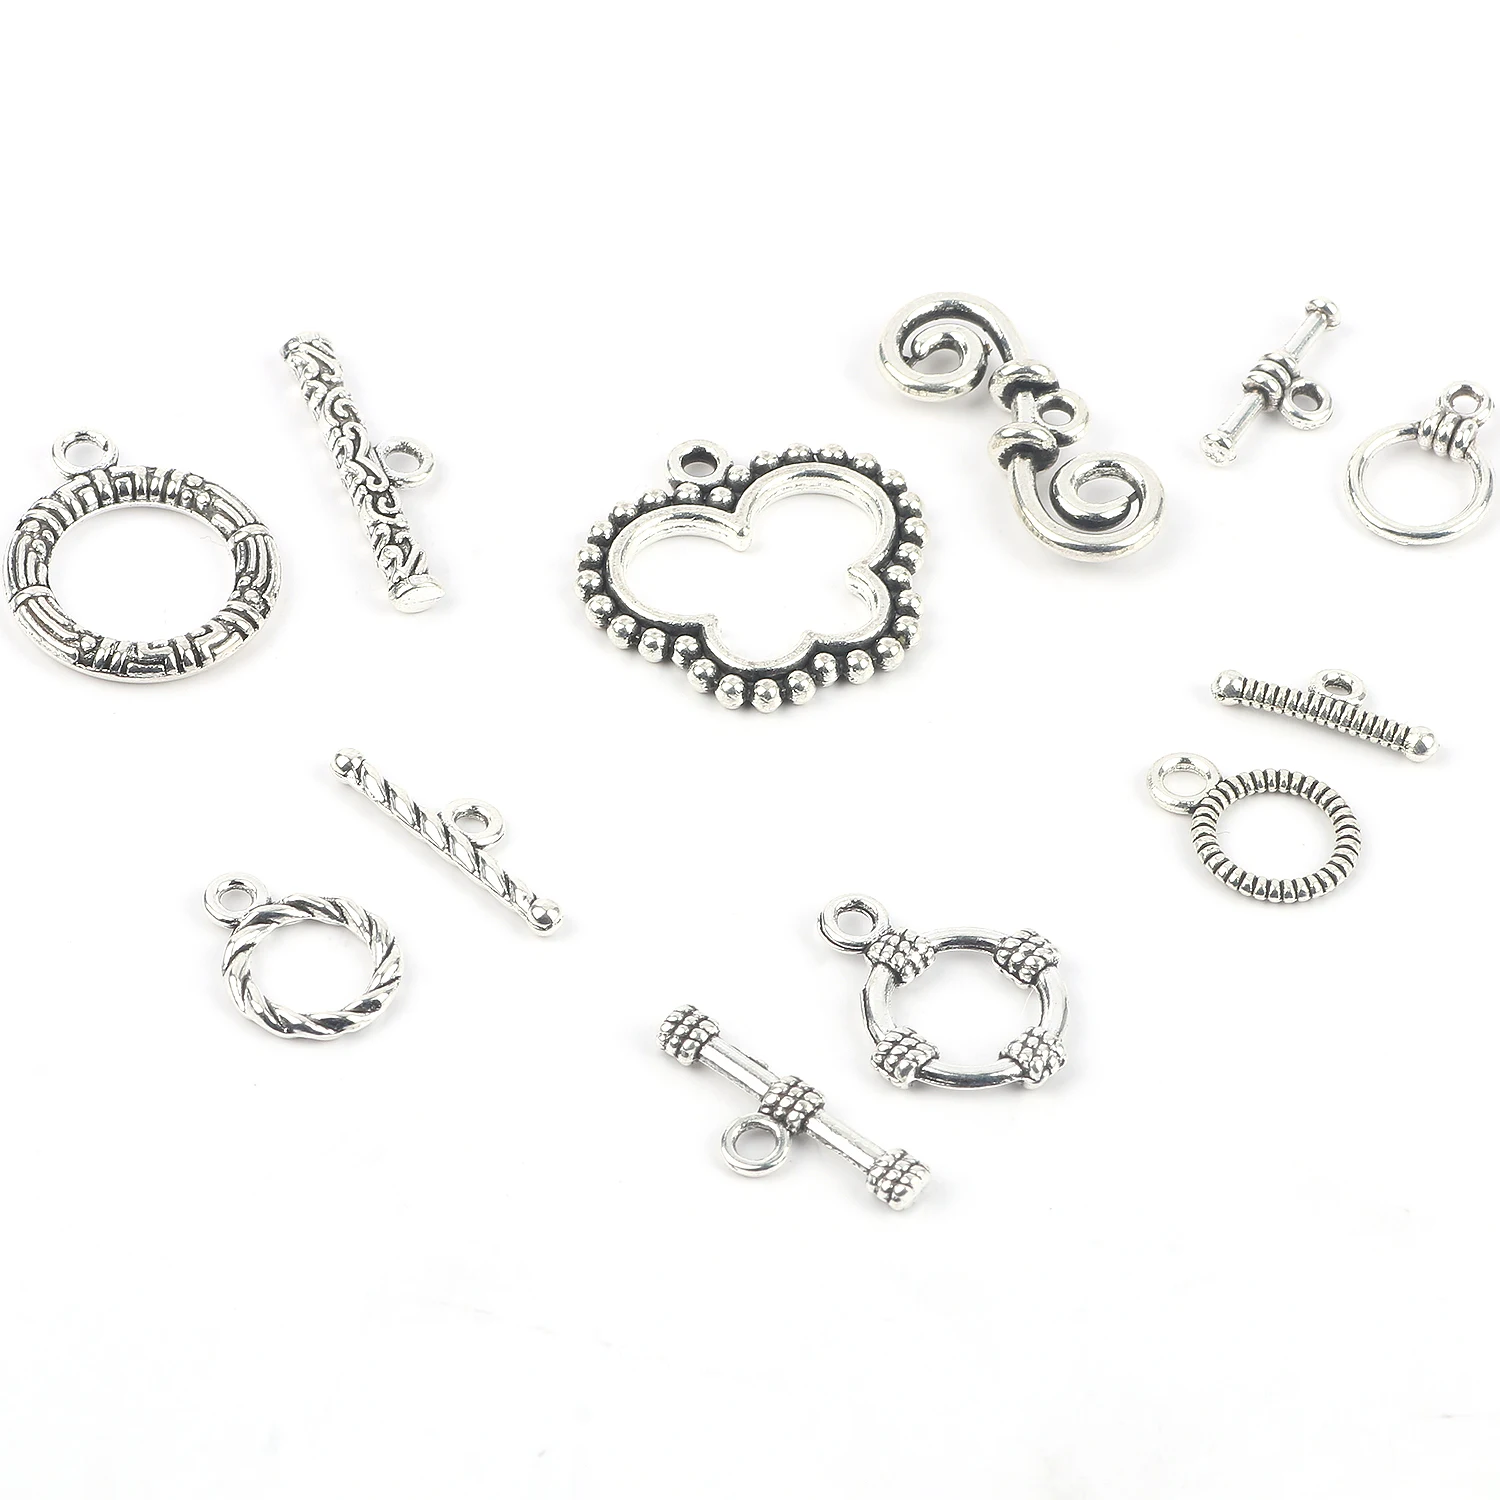 20Sets Silver Color OT Clasps Connectors Bracelet Necklace Toggle Clasps Pendant Buckle For Jewelry Making Findings Accessories